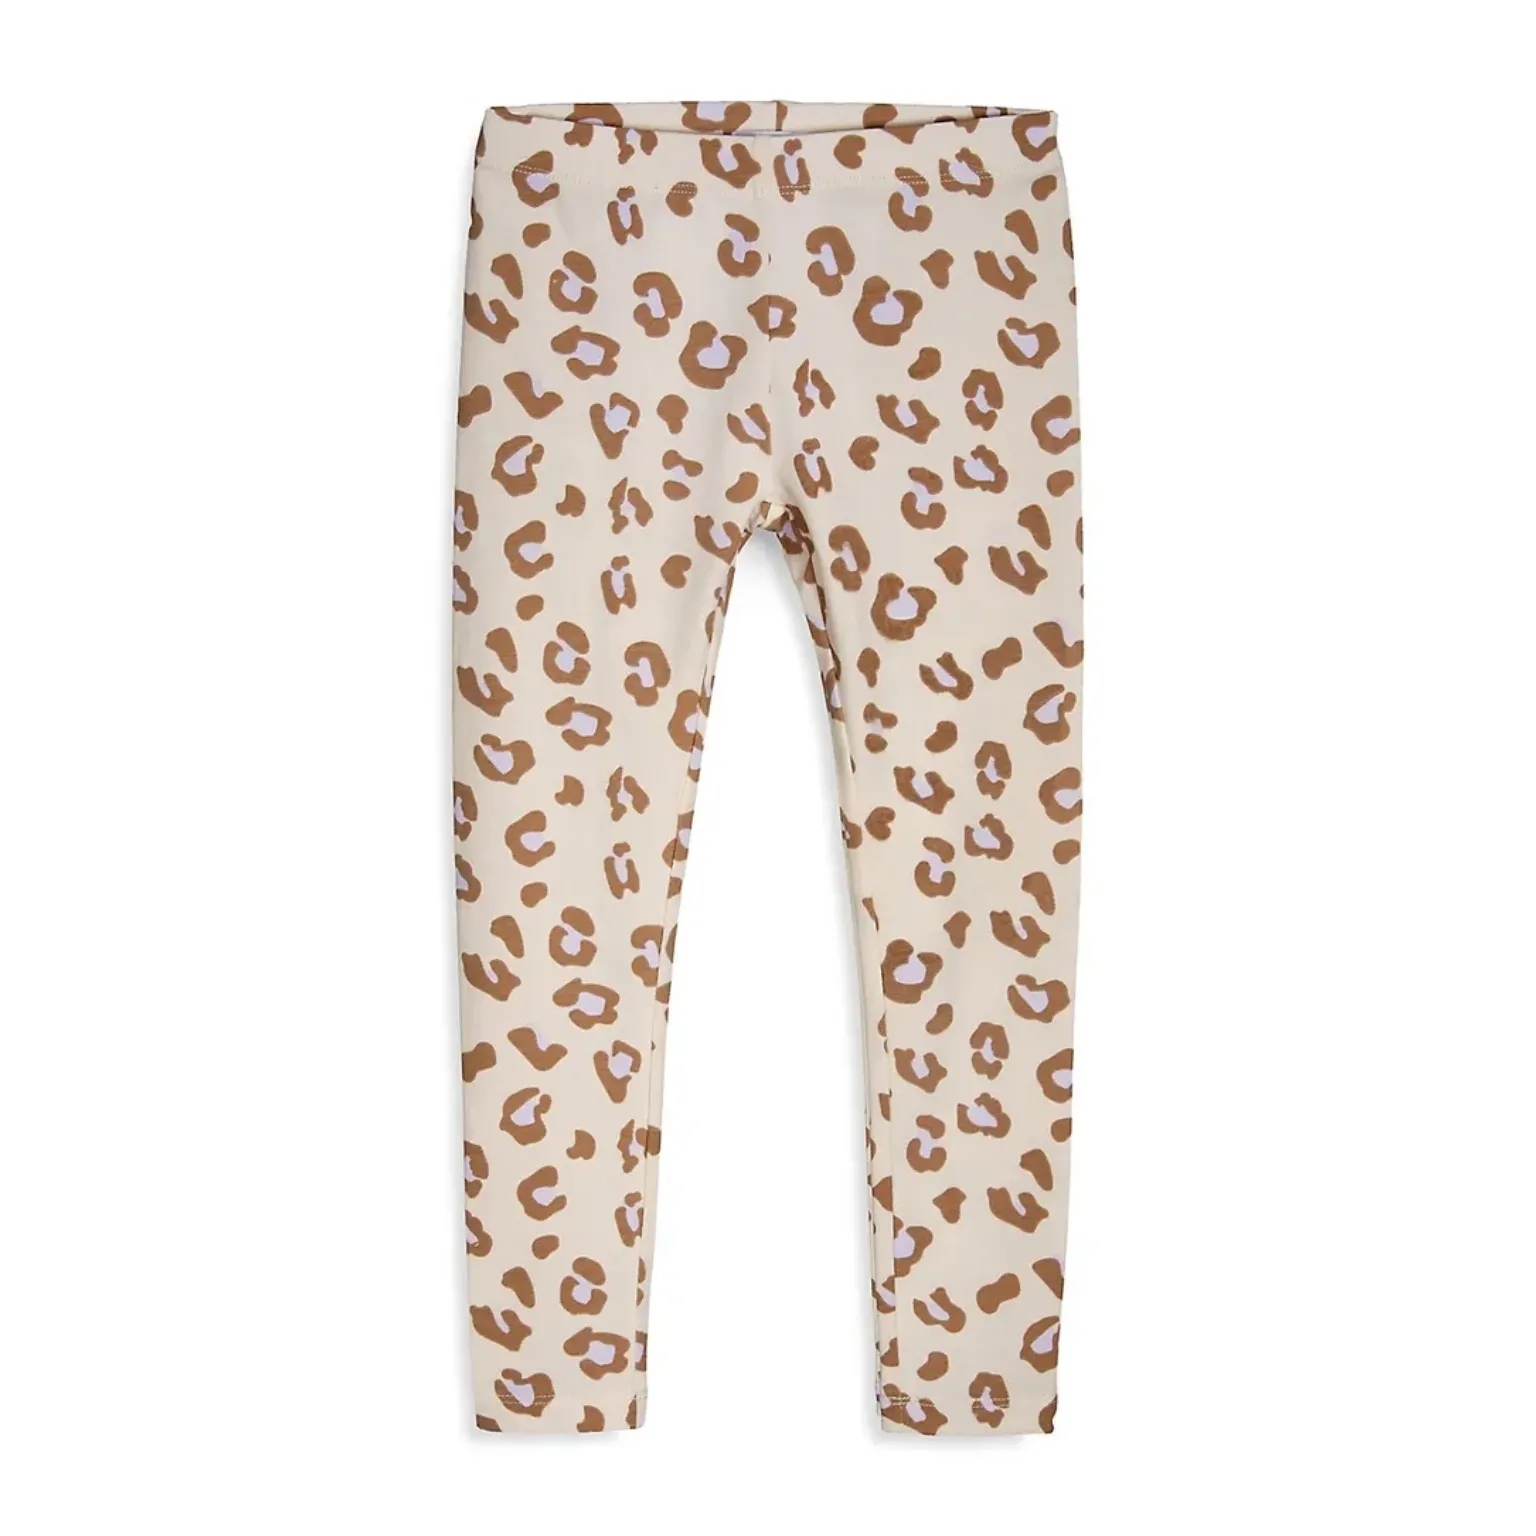 Manufacturing according to your needs for Leopard Baby Leggings.